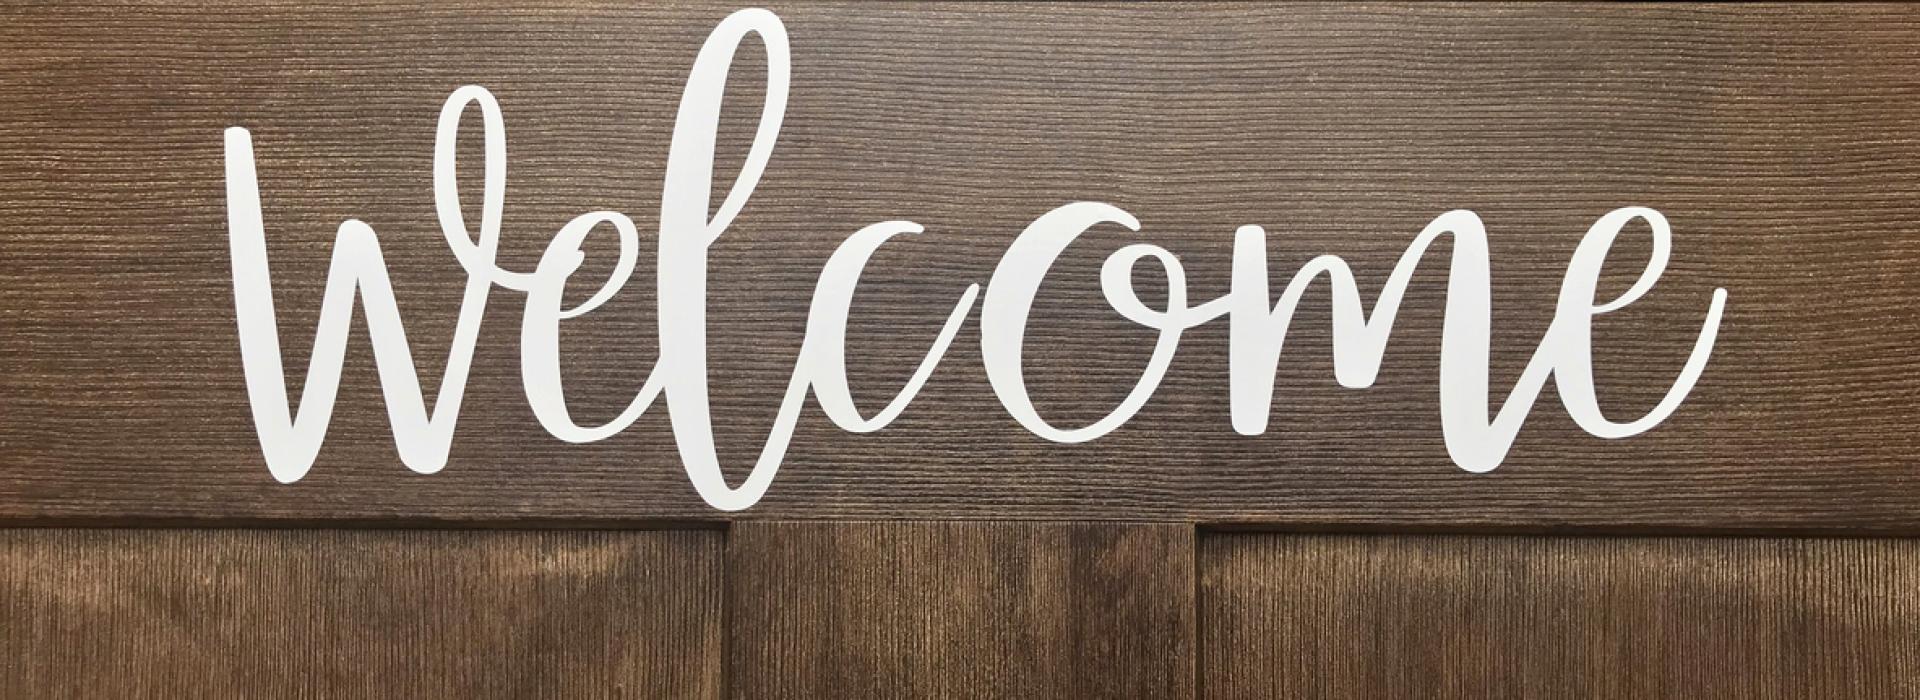 The word "Welcome' is spelled out in a white, cursive stencil on the front of a dark, Craftsmen-style entry door.